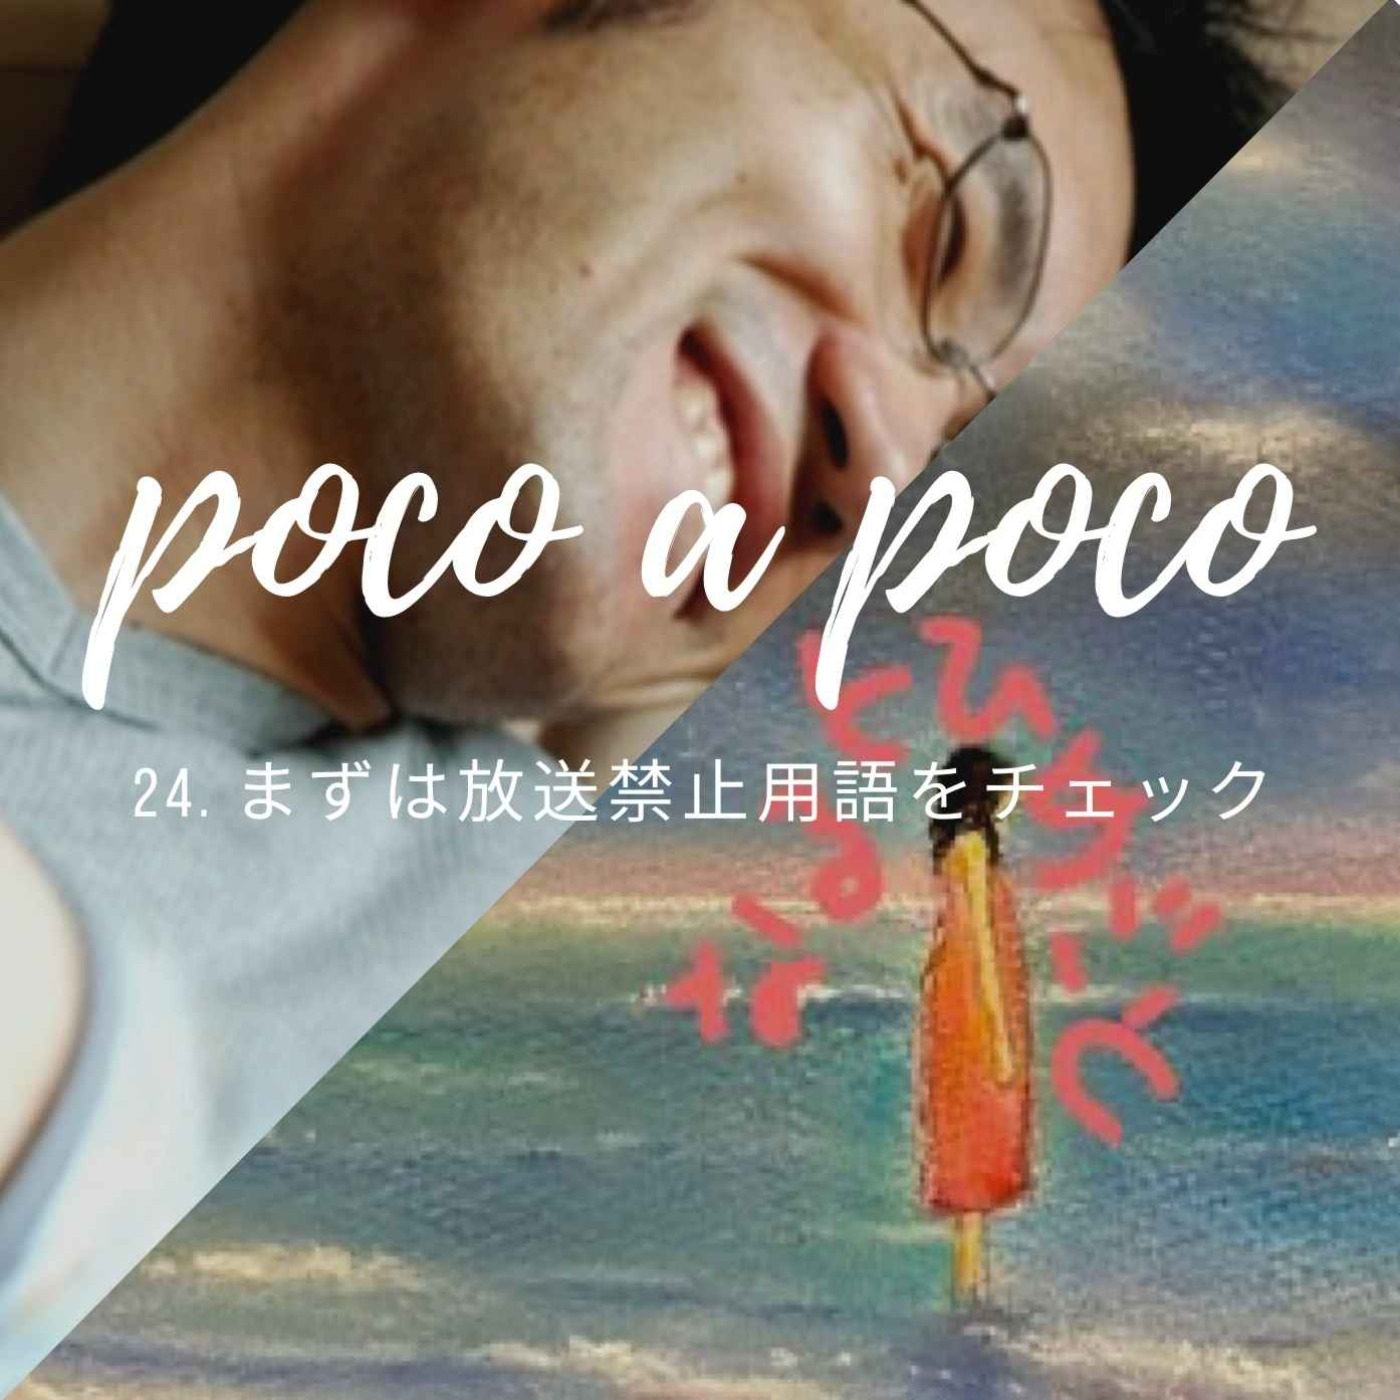 【poco a poco】24. まずは放送禁止用語をチェック